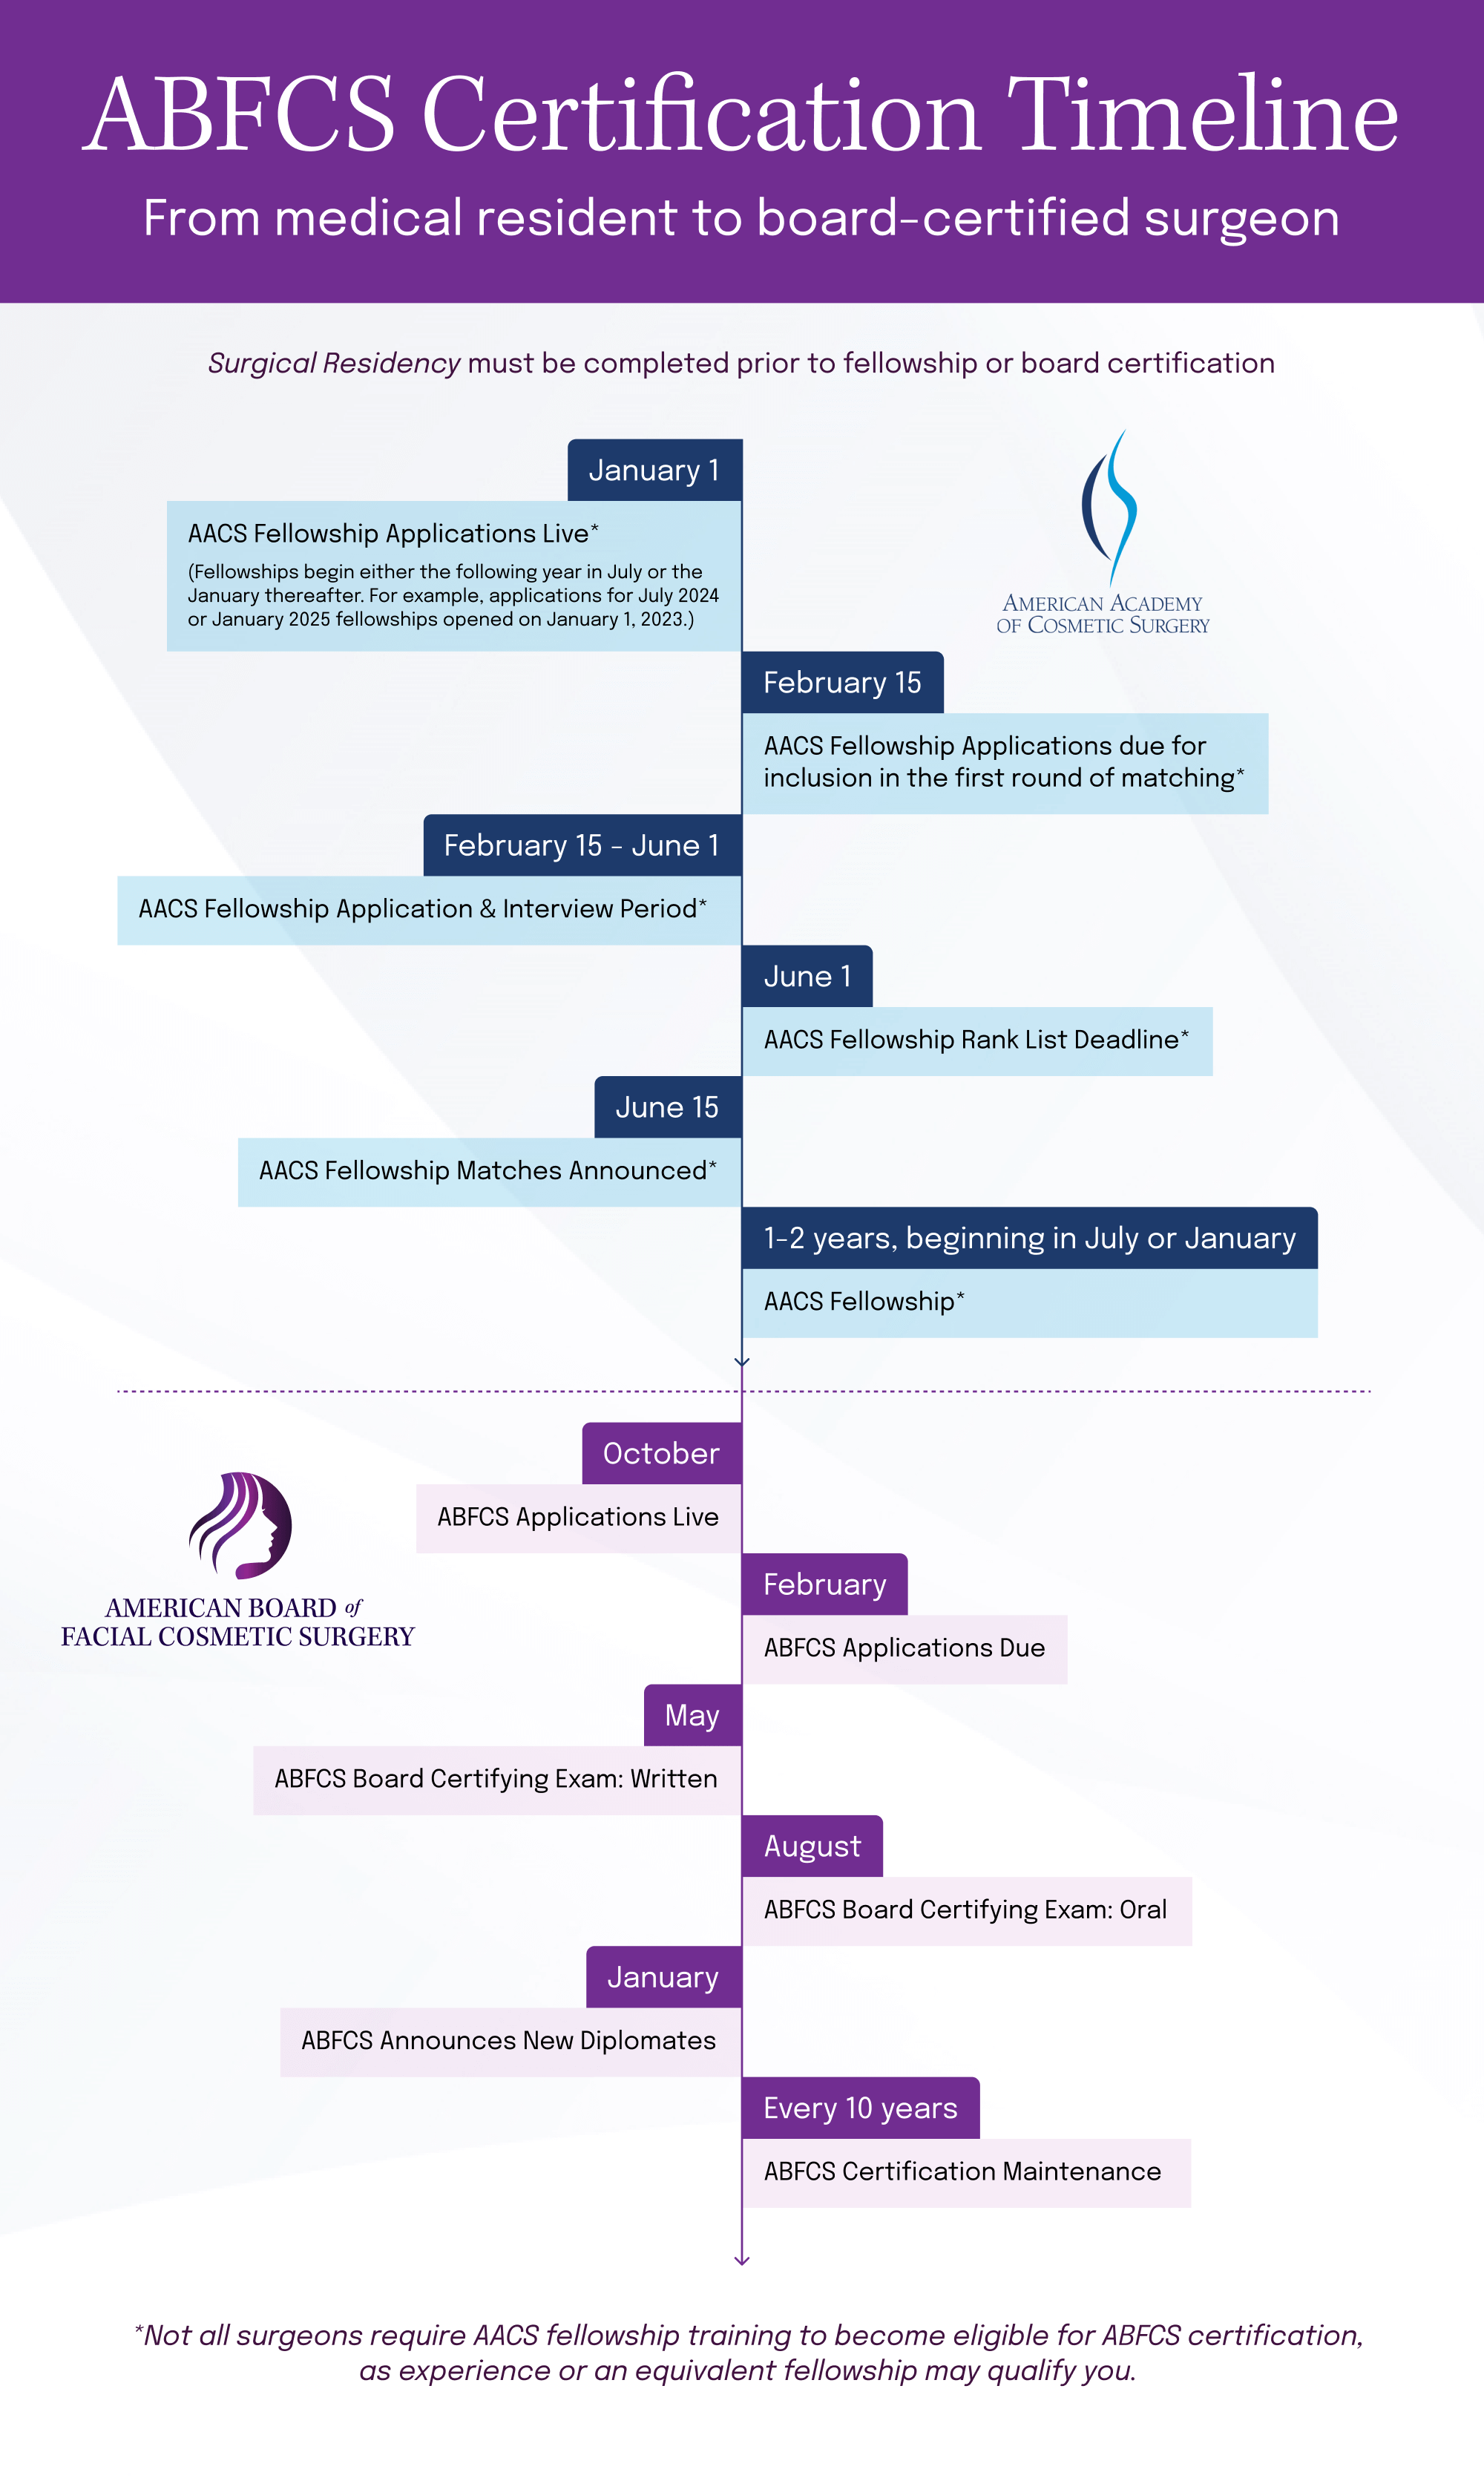 Timeline for achieving facial cosmetic surgery board certification. Fellowship training with AACS may be required, then ABFCS application are live in October; applications are due in February; Written exam is in May; Oral exam is in August; and ABFCS announces new Diplomates in January. ABFCS certification maintenance occurs every 10 years.